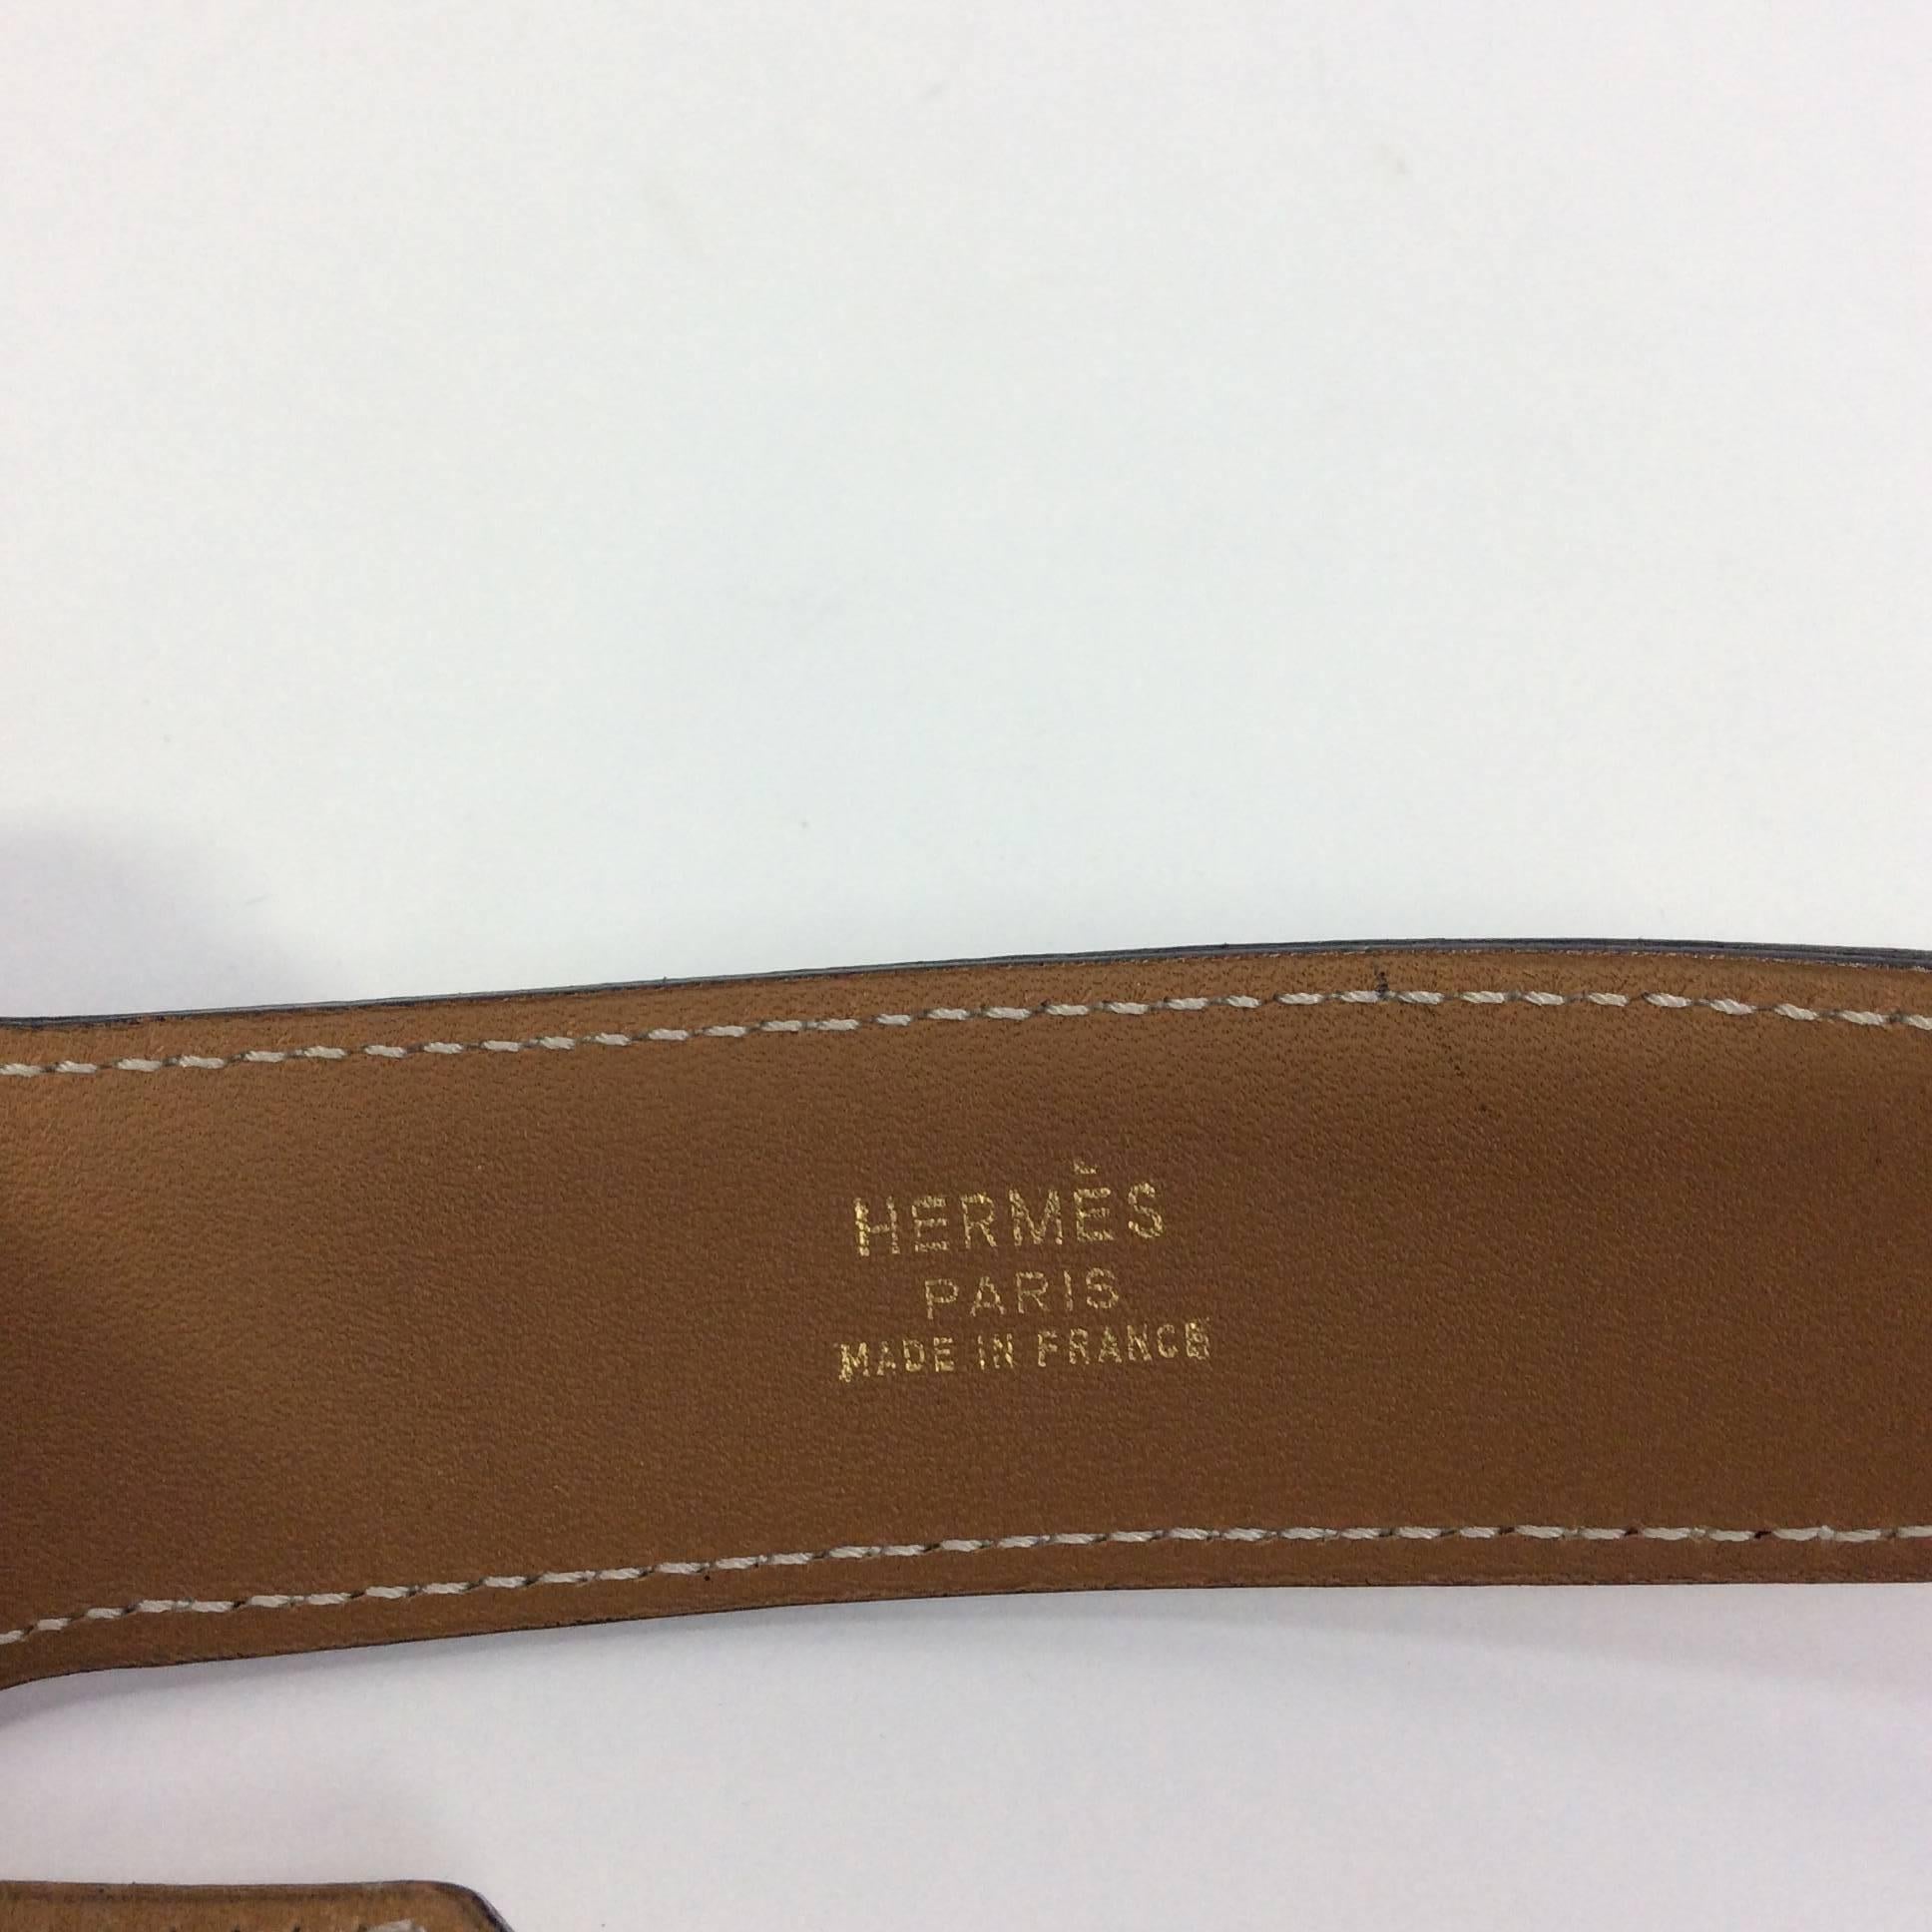 Tan Leather Kelly Belt
35 inches long, adjustable to 33 inches
1.5 inches wide
Includes gold hardware with engraved Hermes logo
Tan leather with white topstiching and black accents